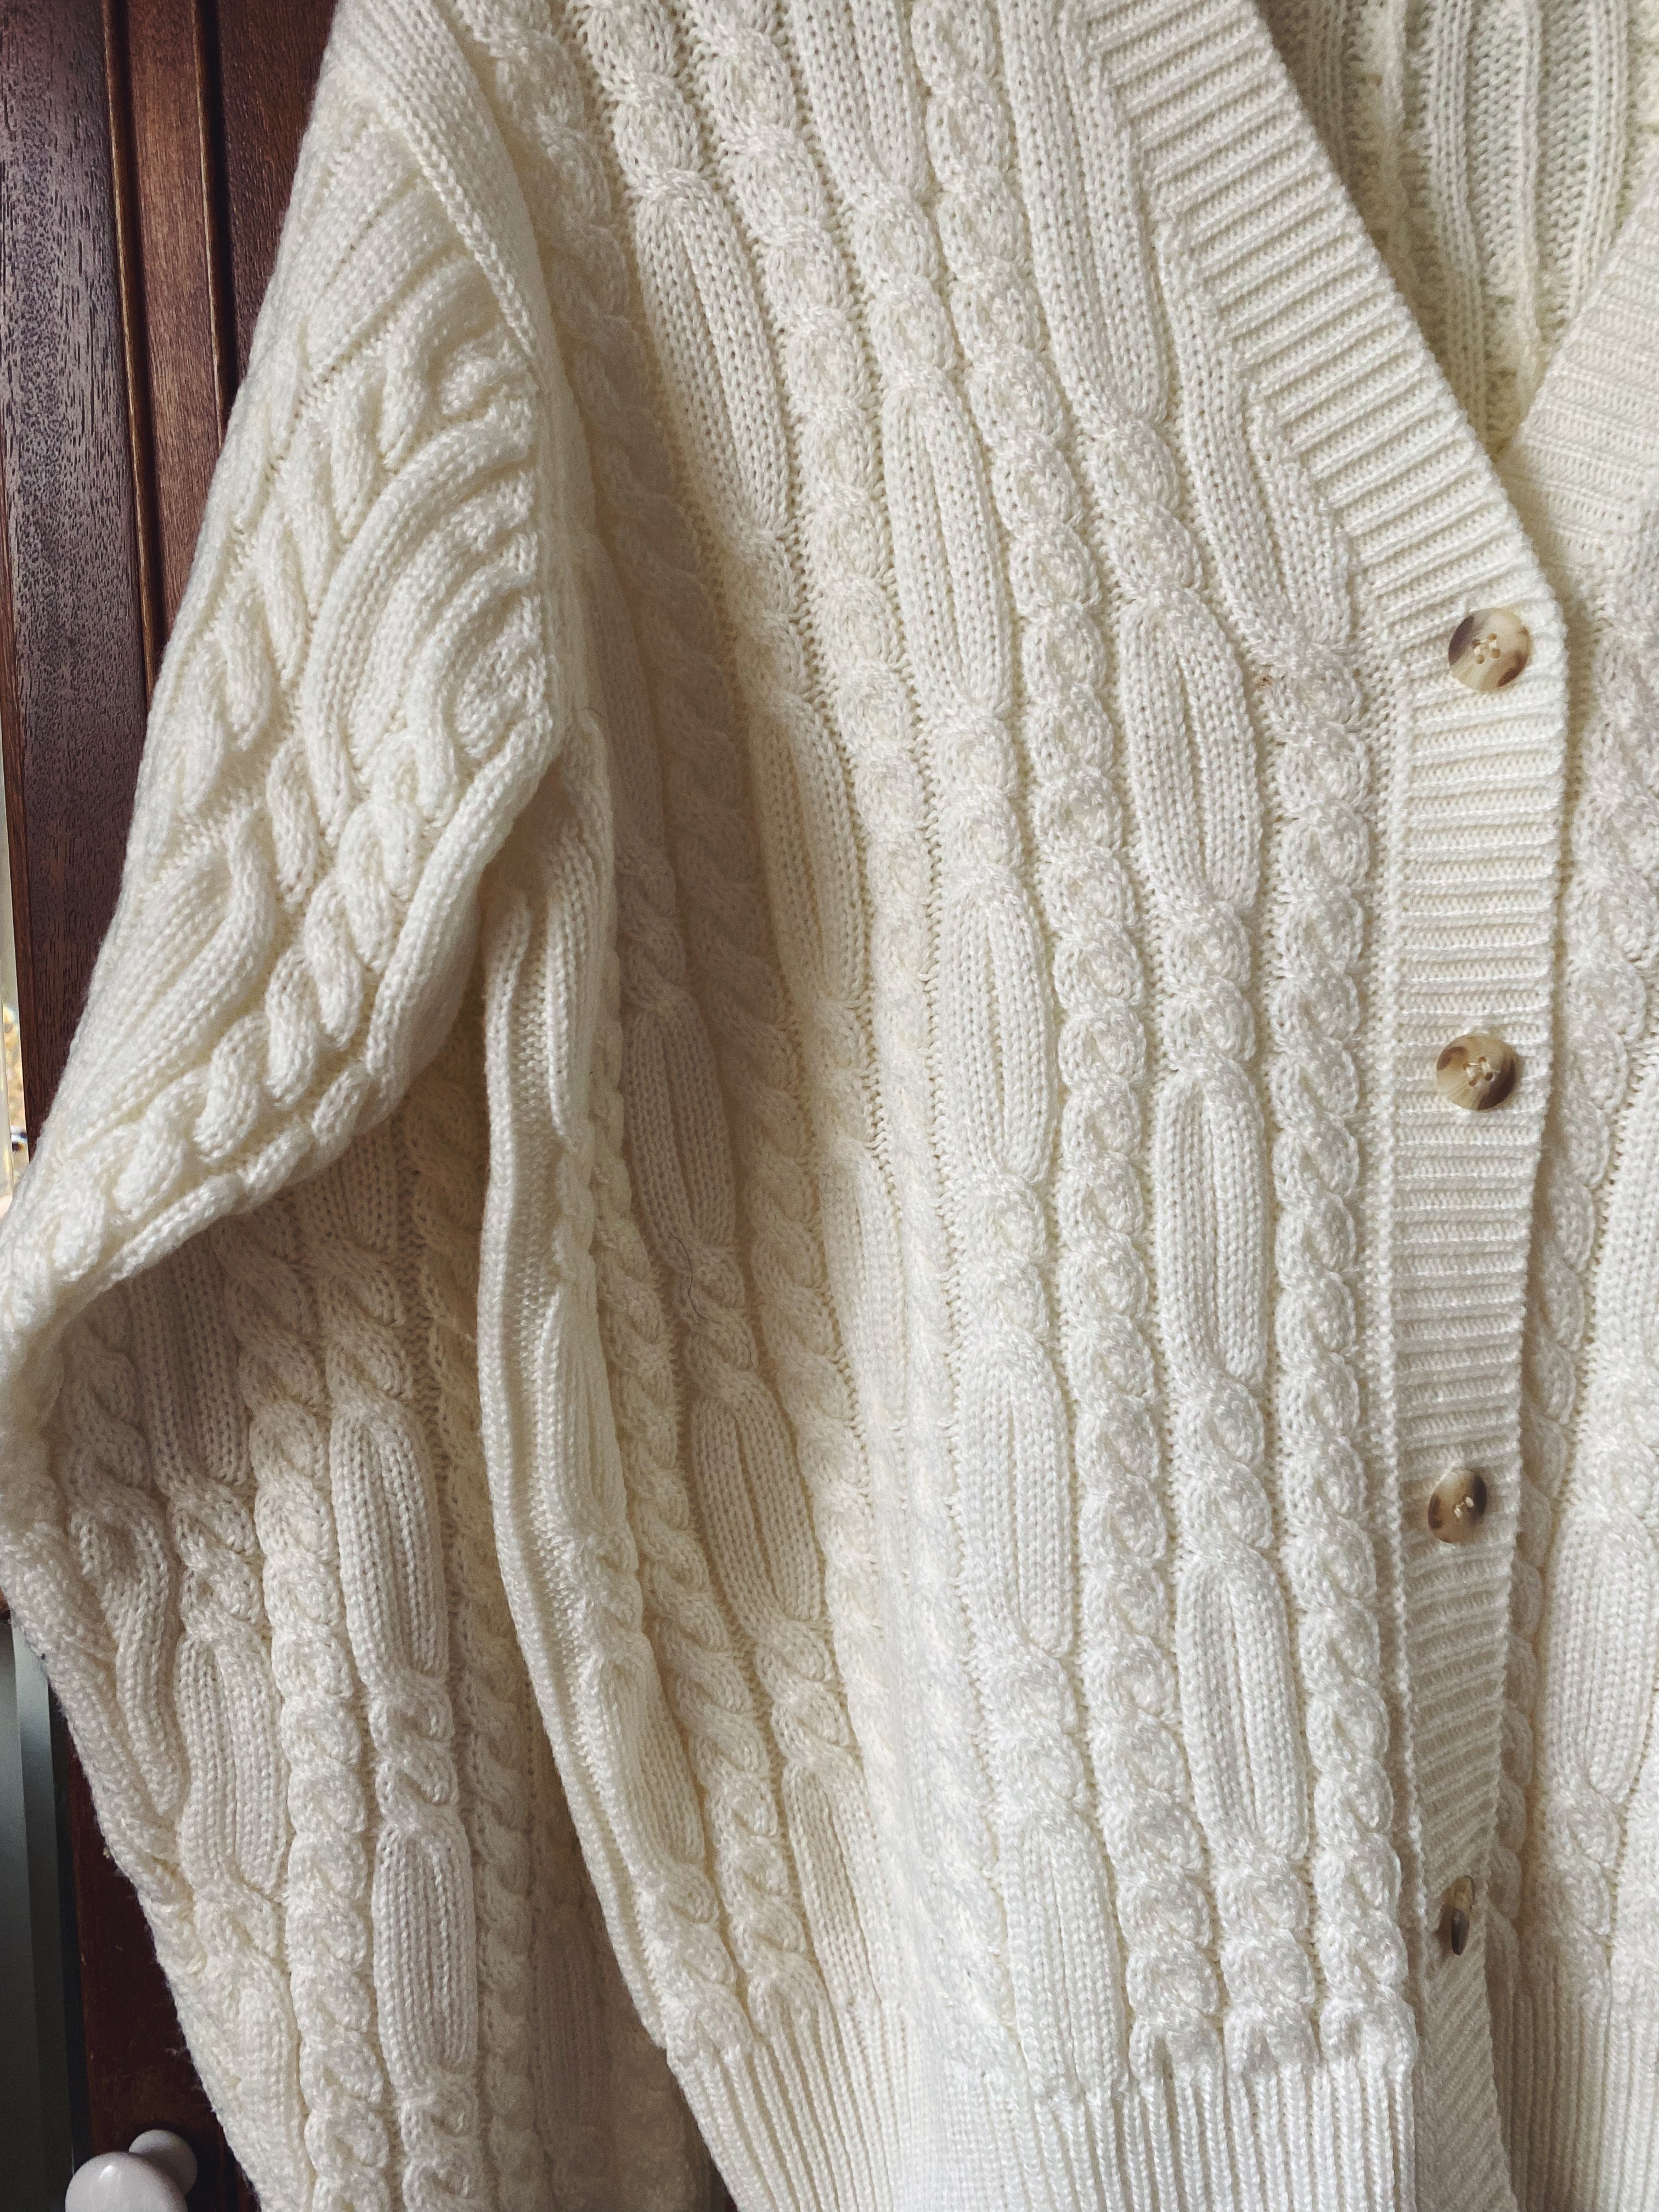 90s Cream Cable-Knit Cardigan